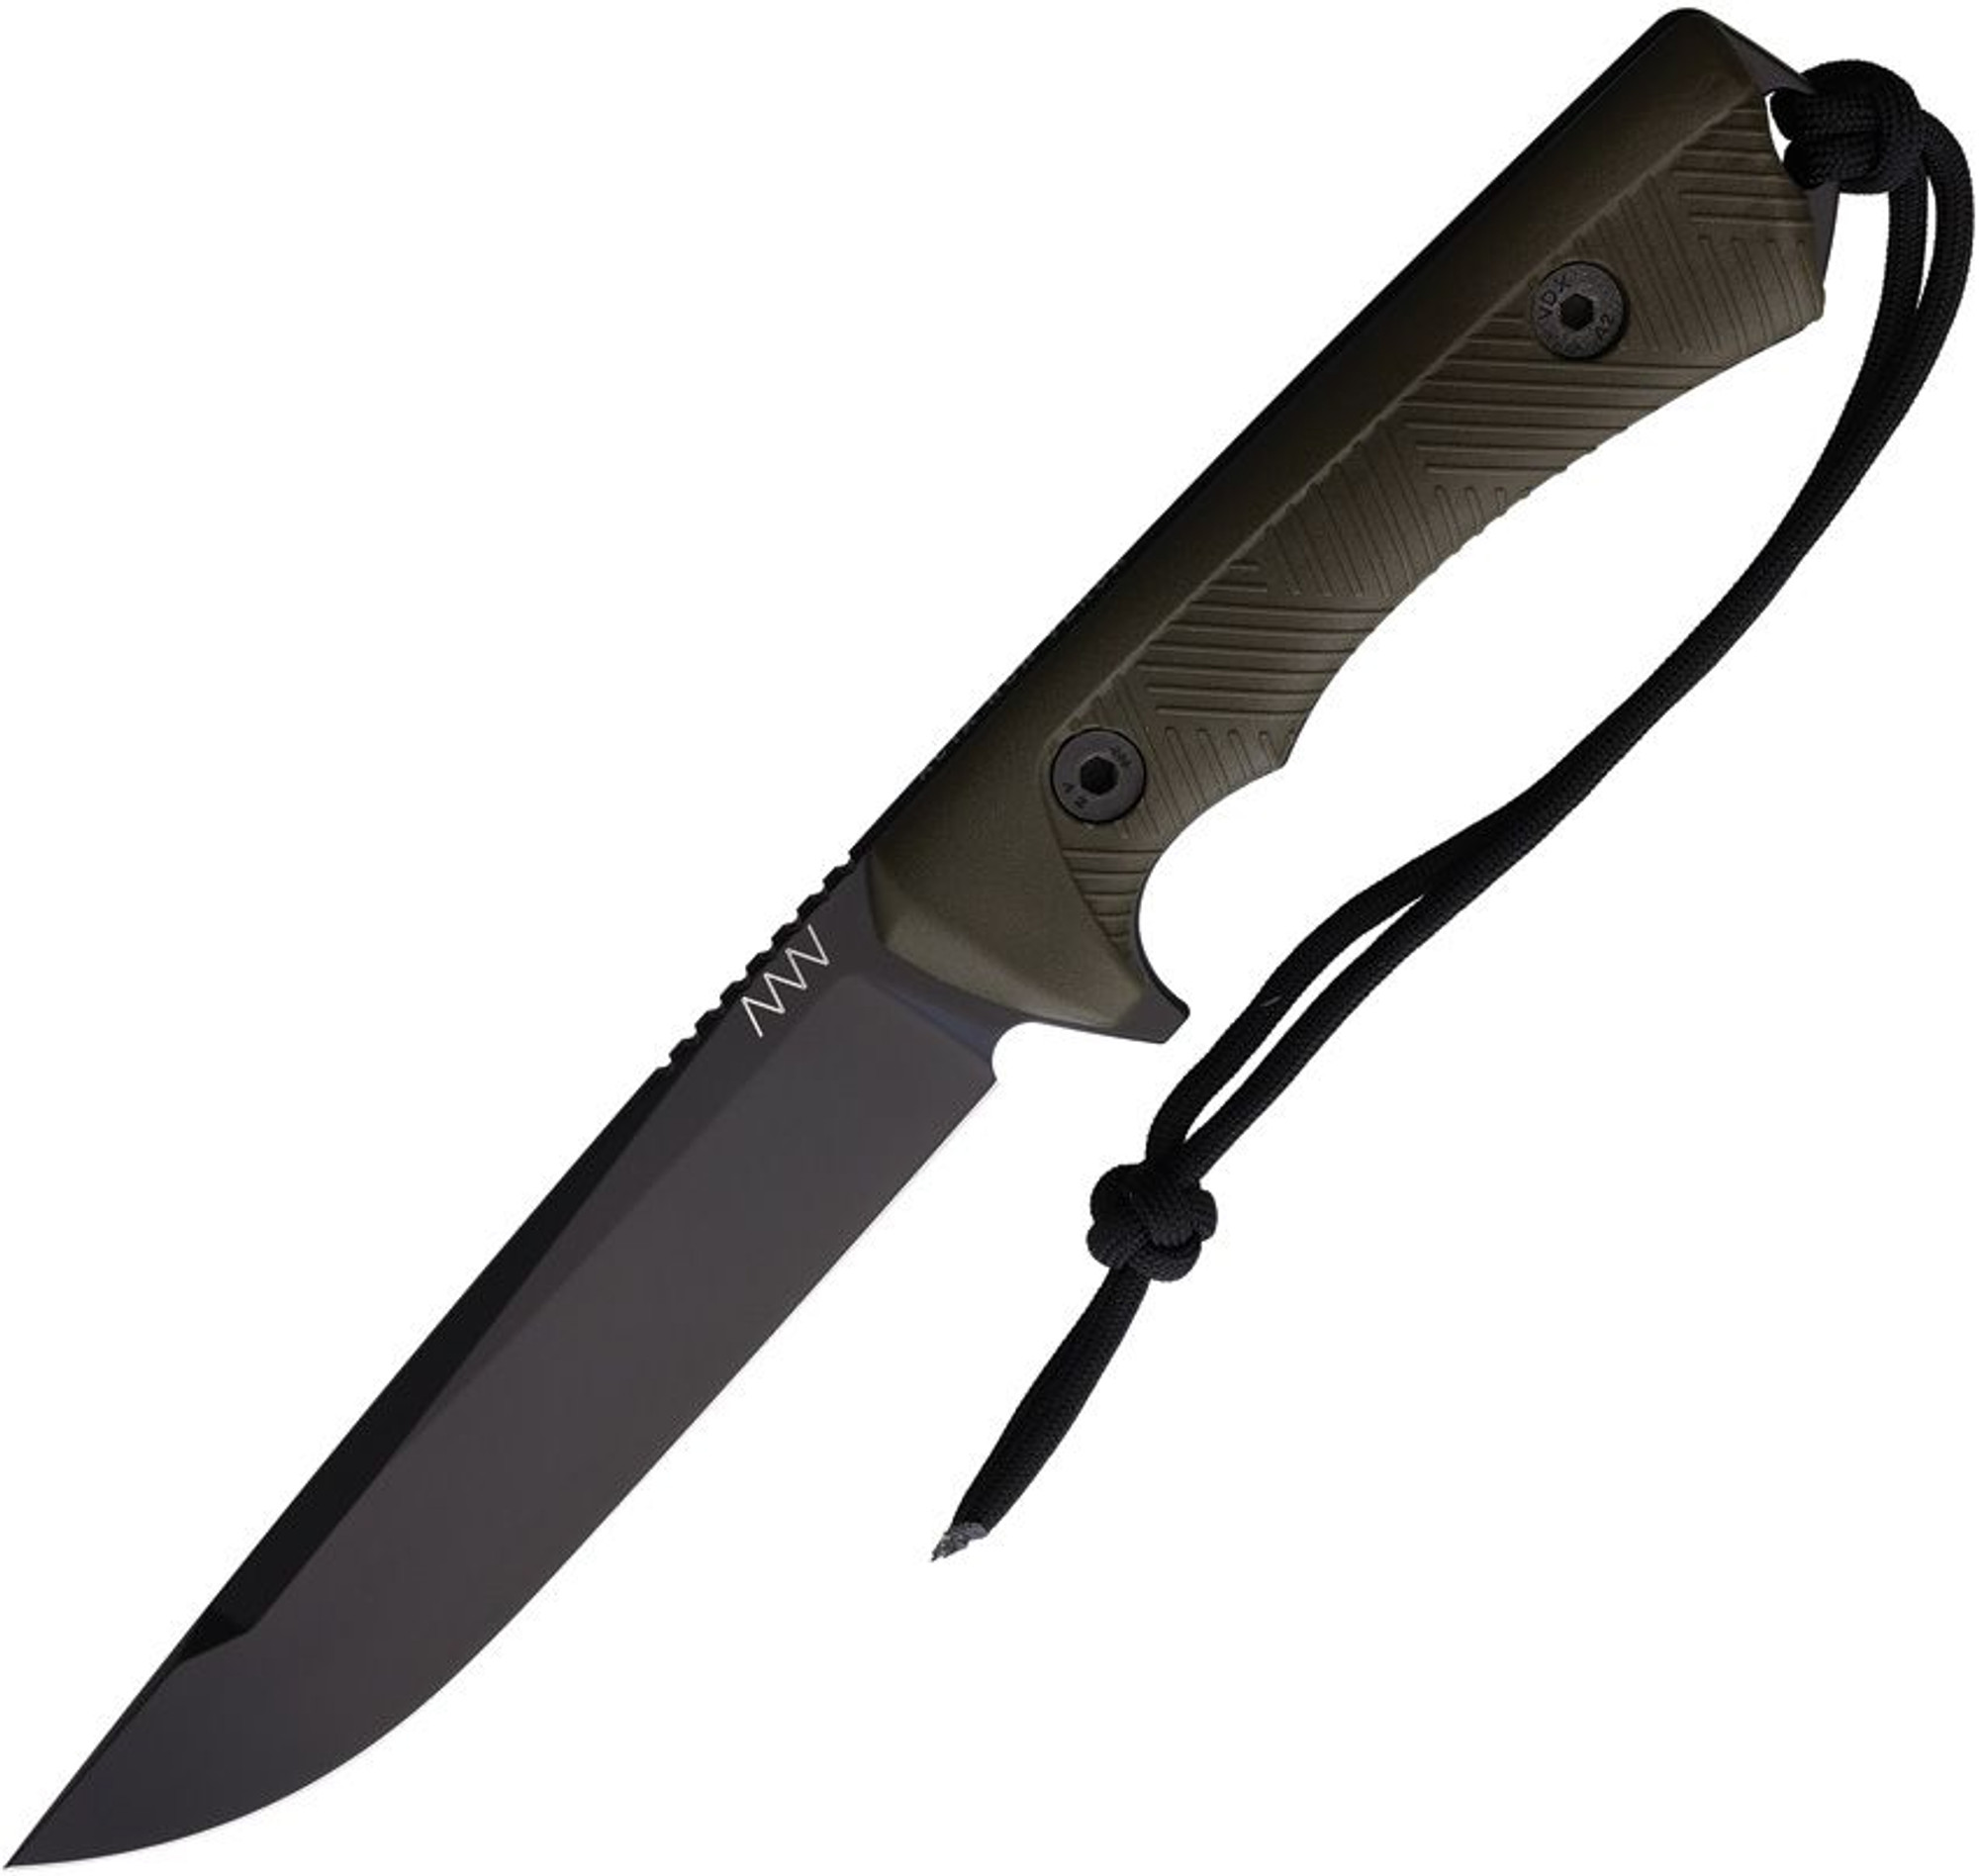 P300 Fixed Blade Blk/OD